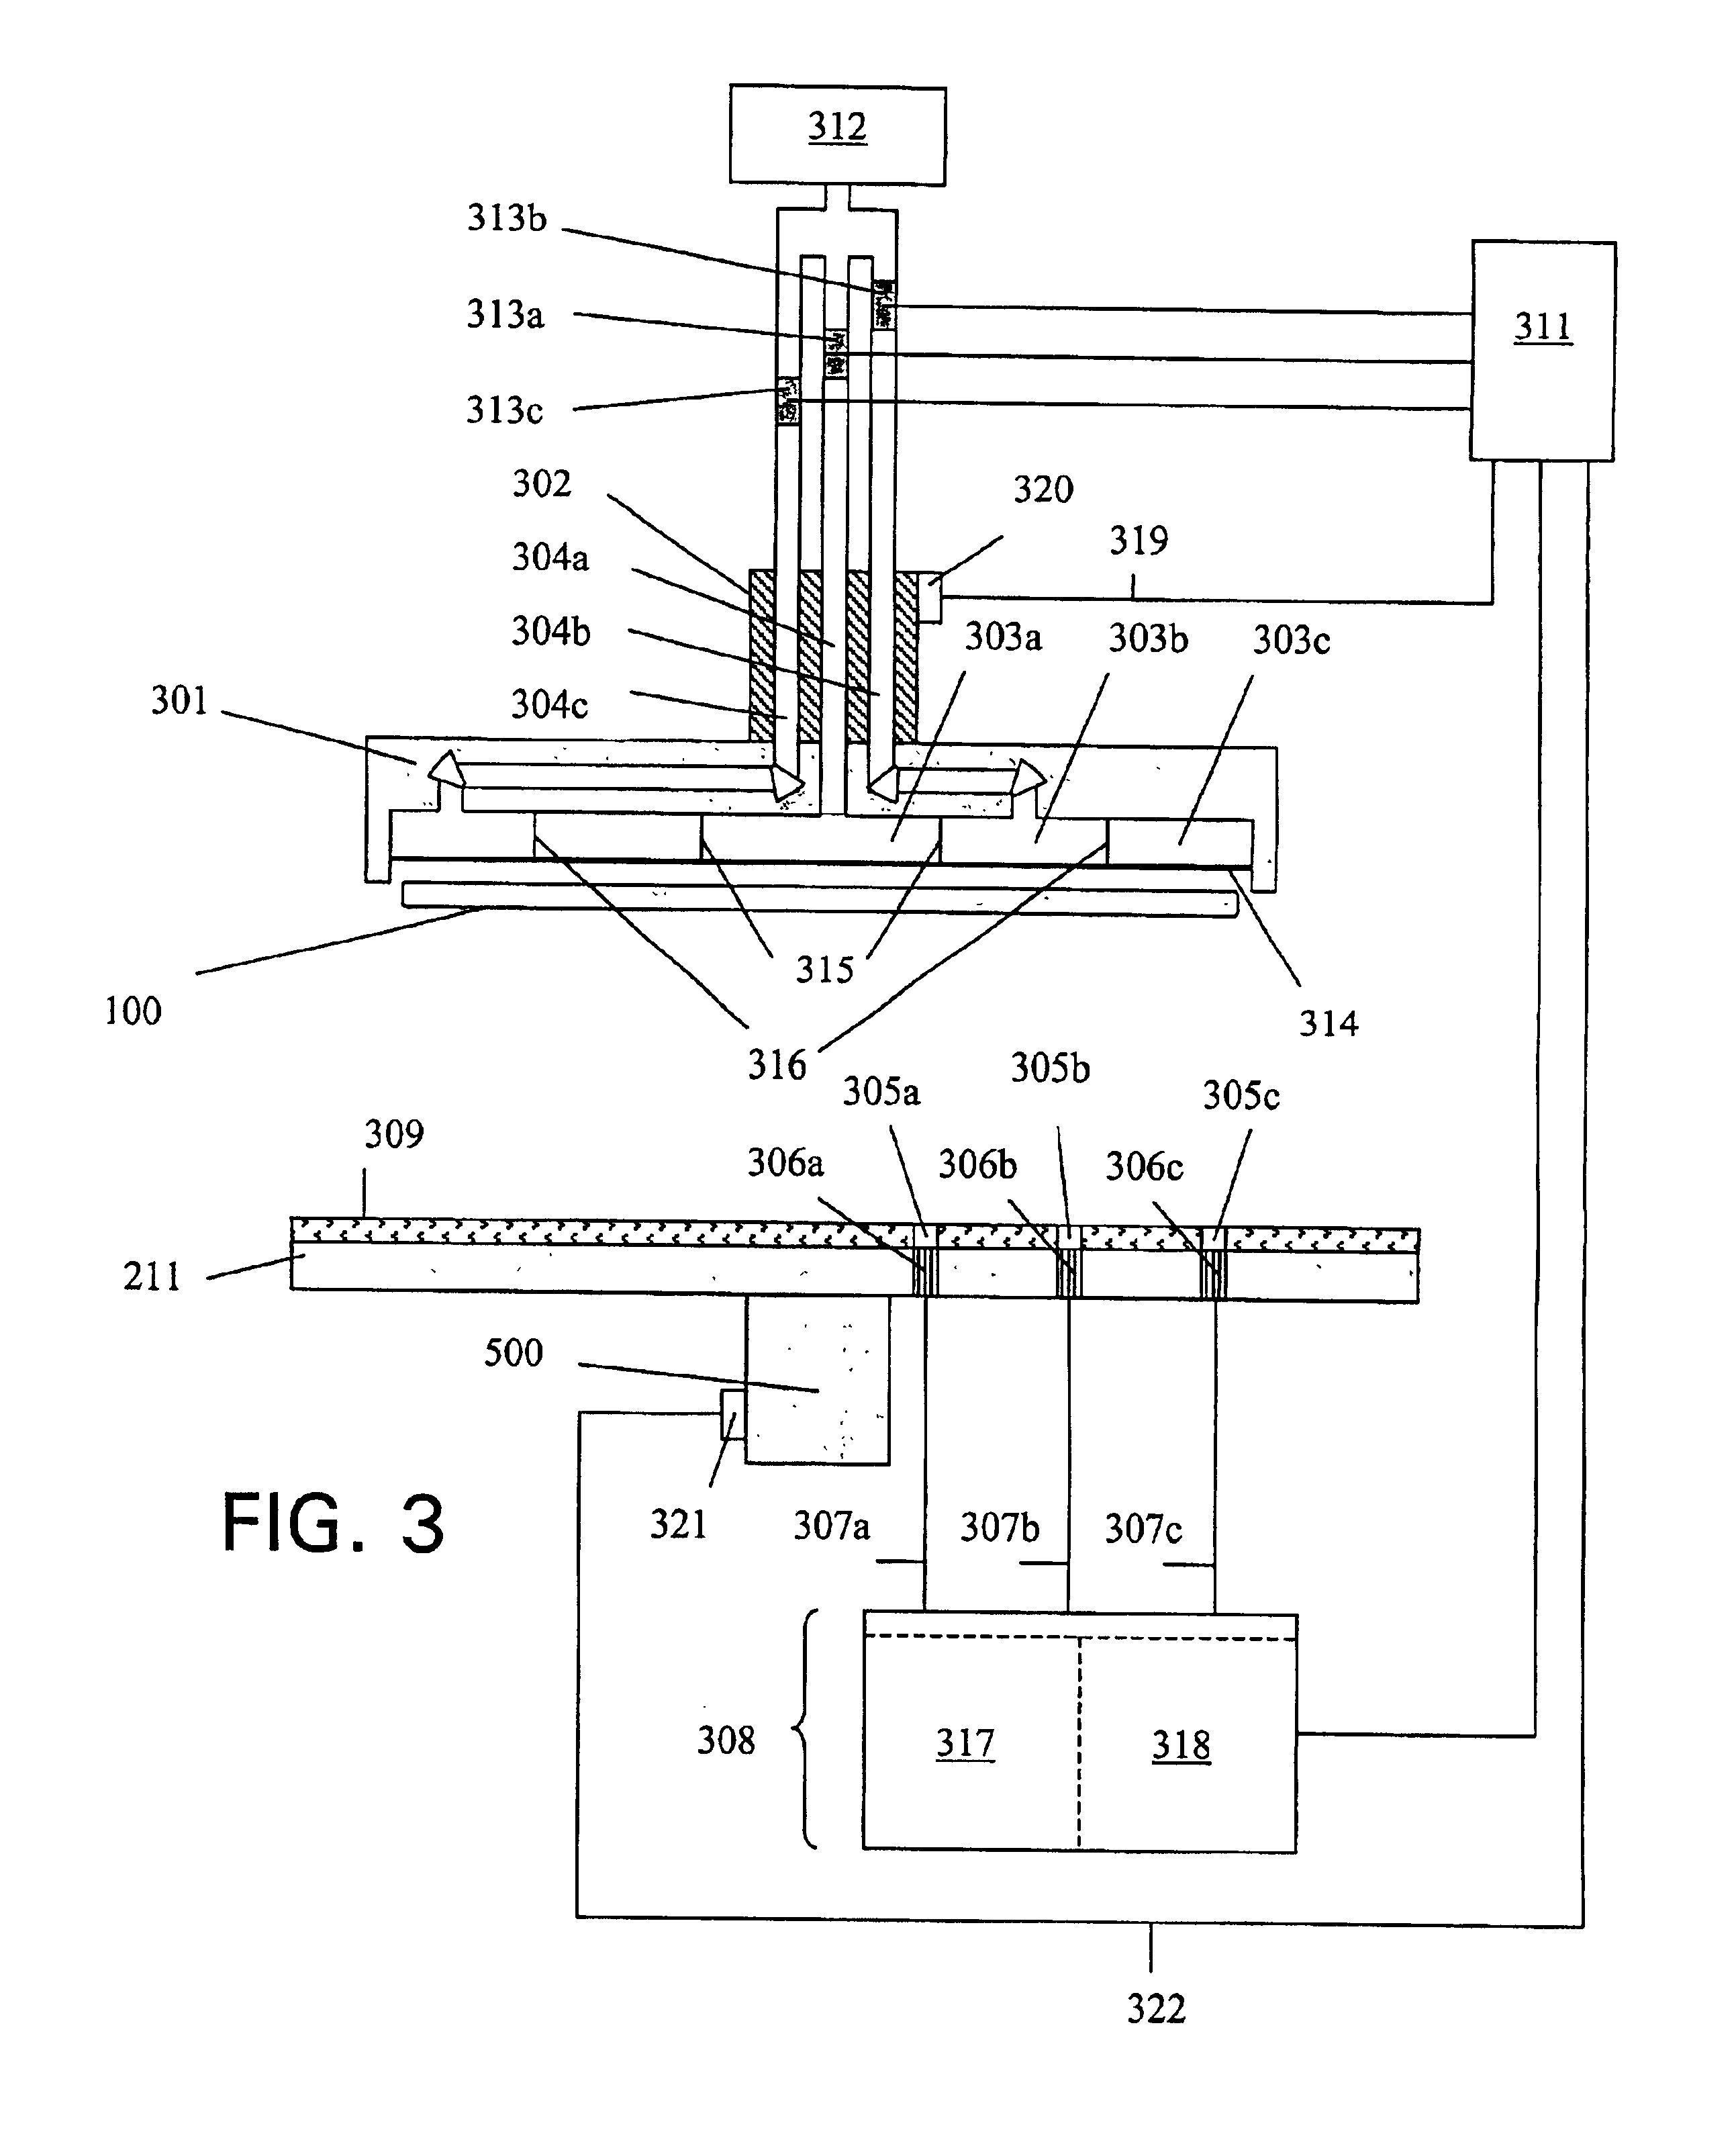 Multizone carrier with process monitoring system for chemical-mechanical planarization tool